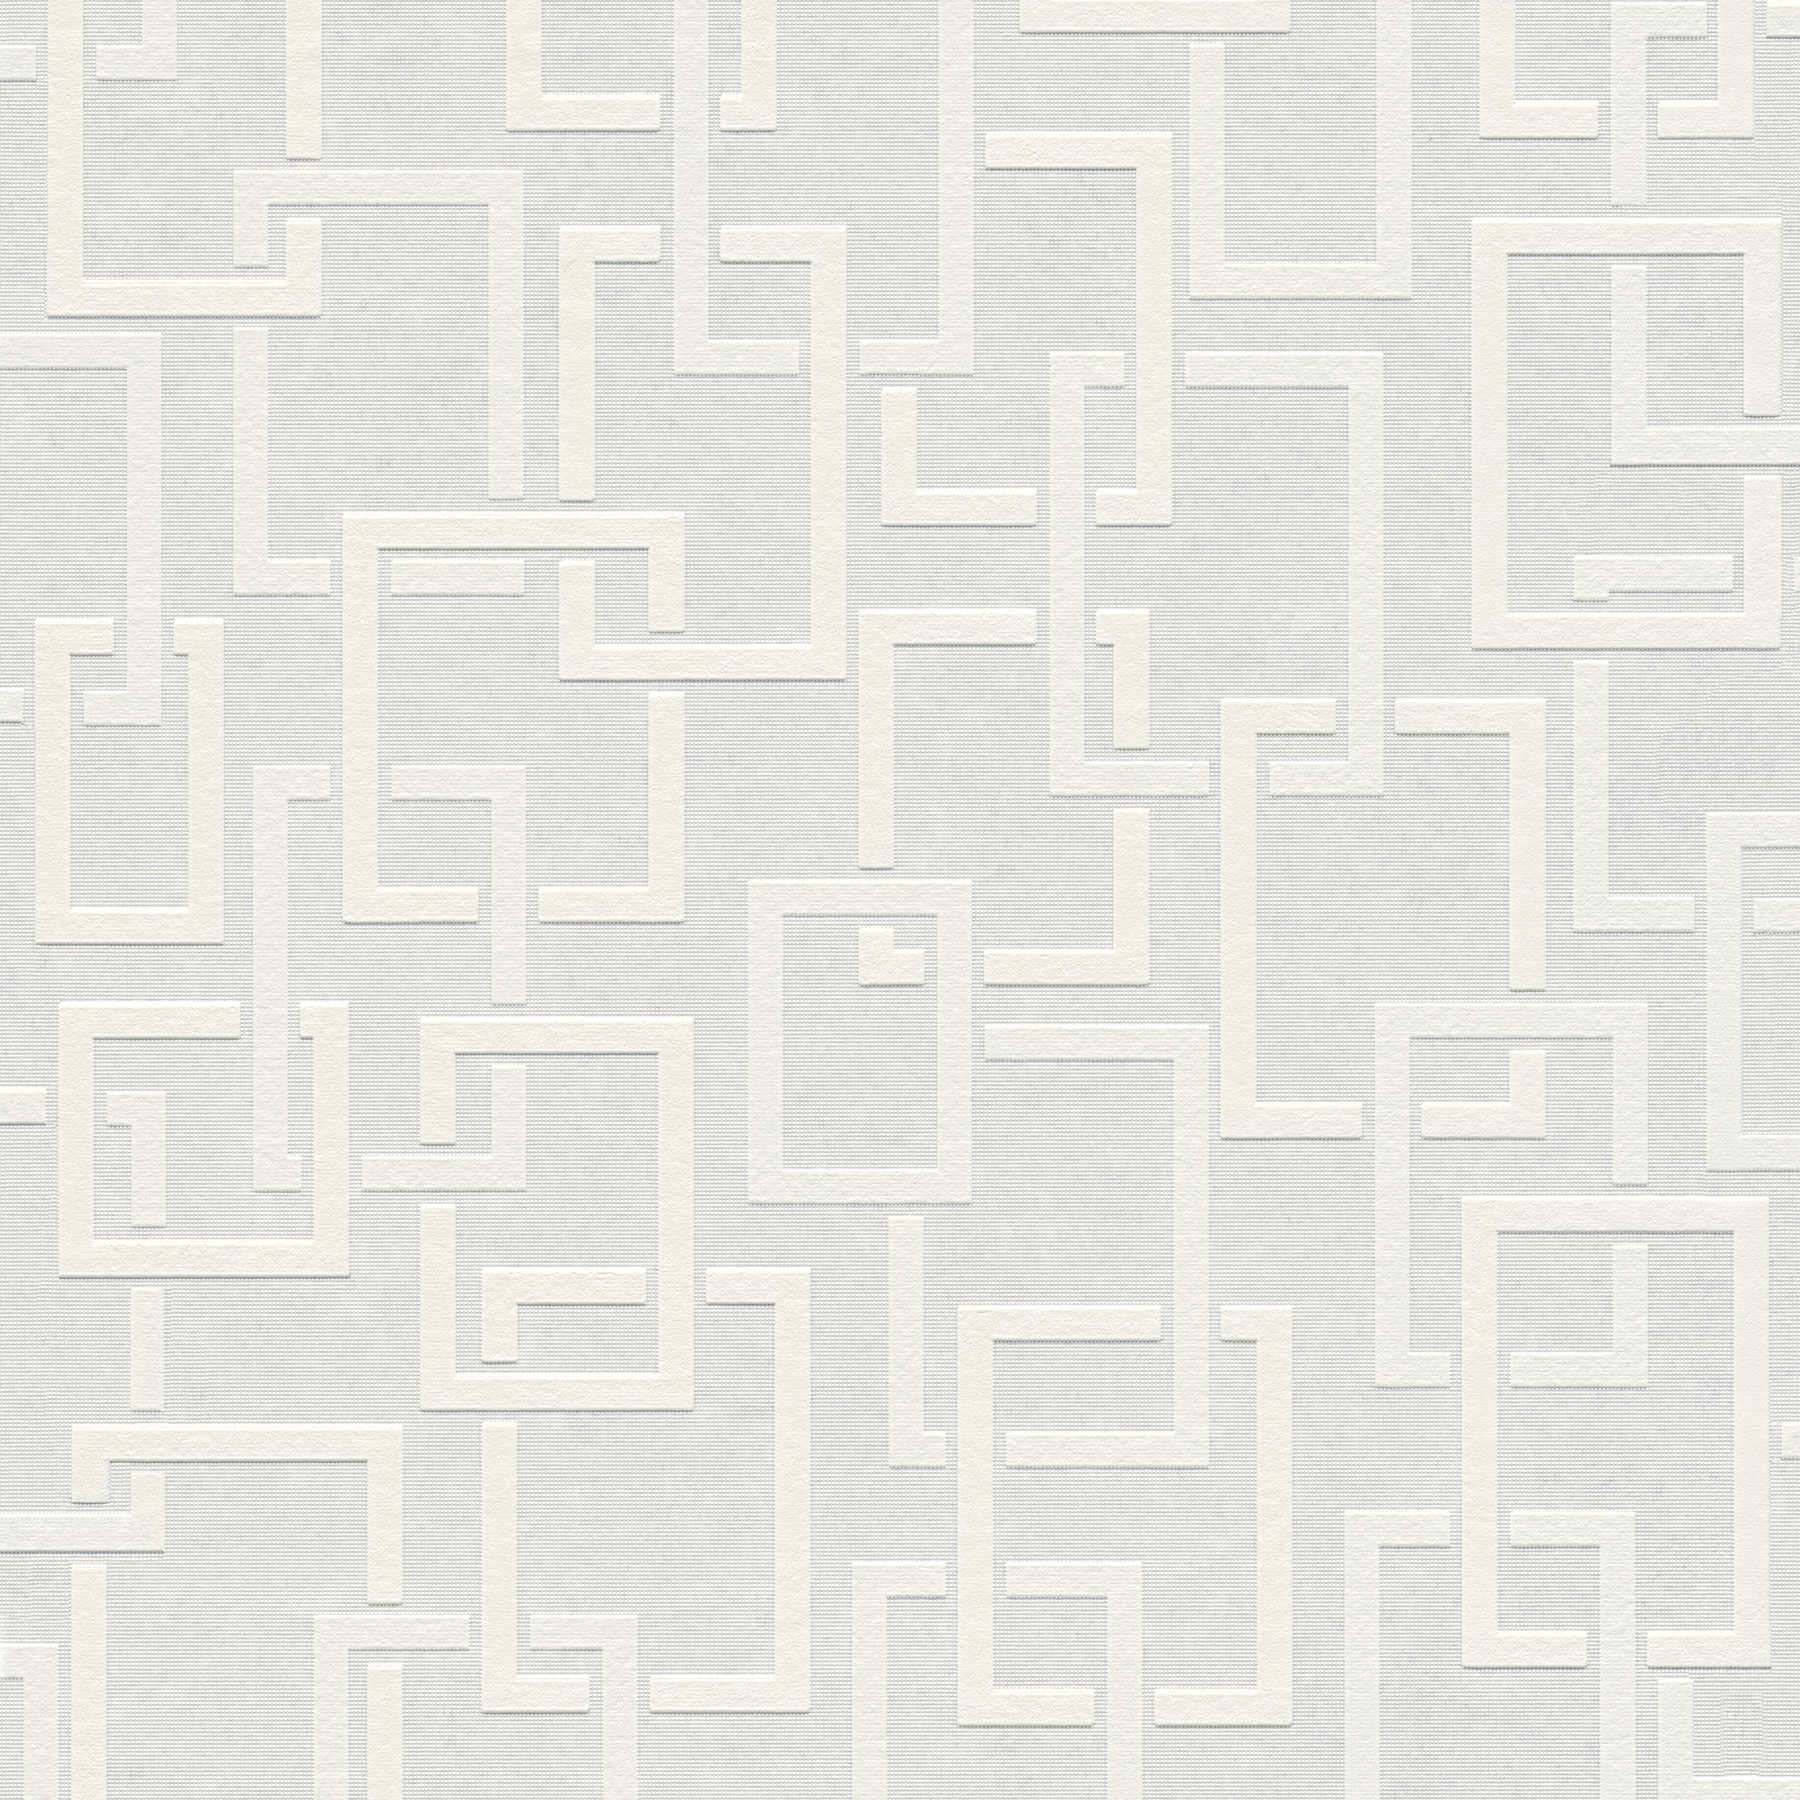         Retro pattern wallpaper to paint over with 3D effect
    